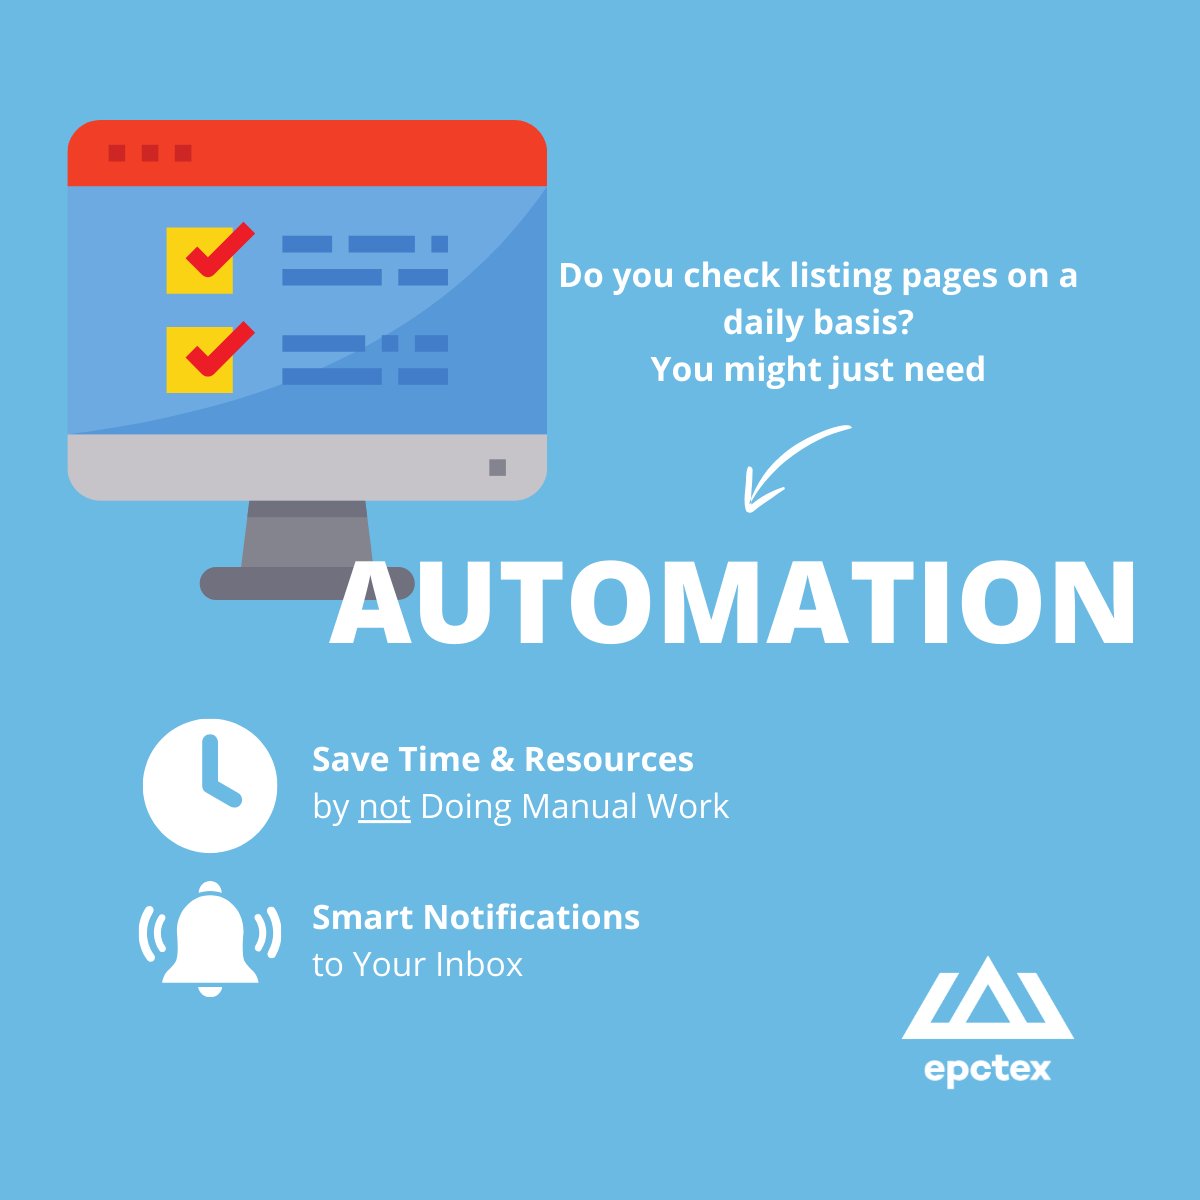 Adopt an 'automation-first' mindset. Always ask, 'Can this process be automated?' You'll be surprised how often the answer is yes. #automation #webscraping #epctex